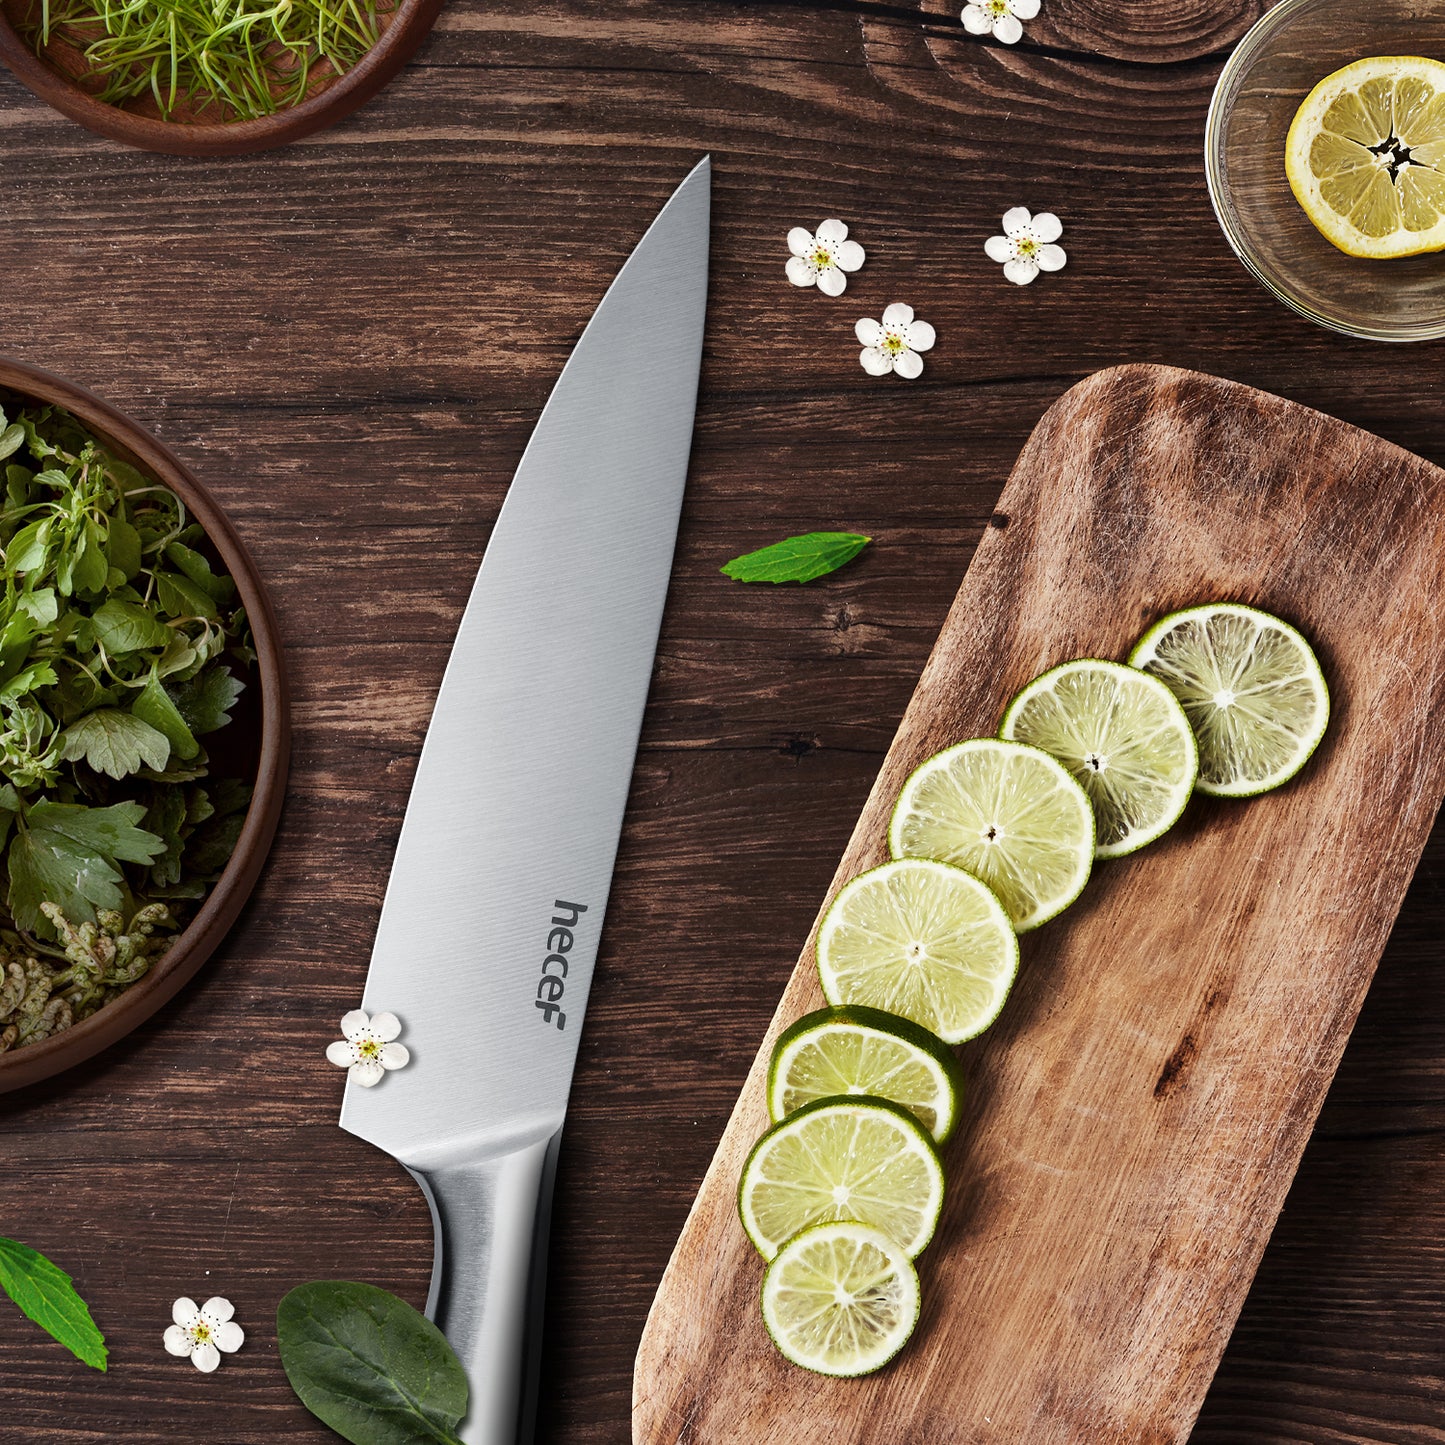 Hecef Premium Kitchen Knife Set of 5, Satin Finish Blade with Hollow Handle  - AliExpress